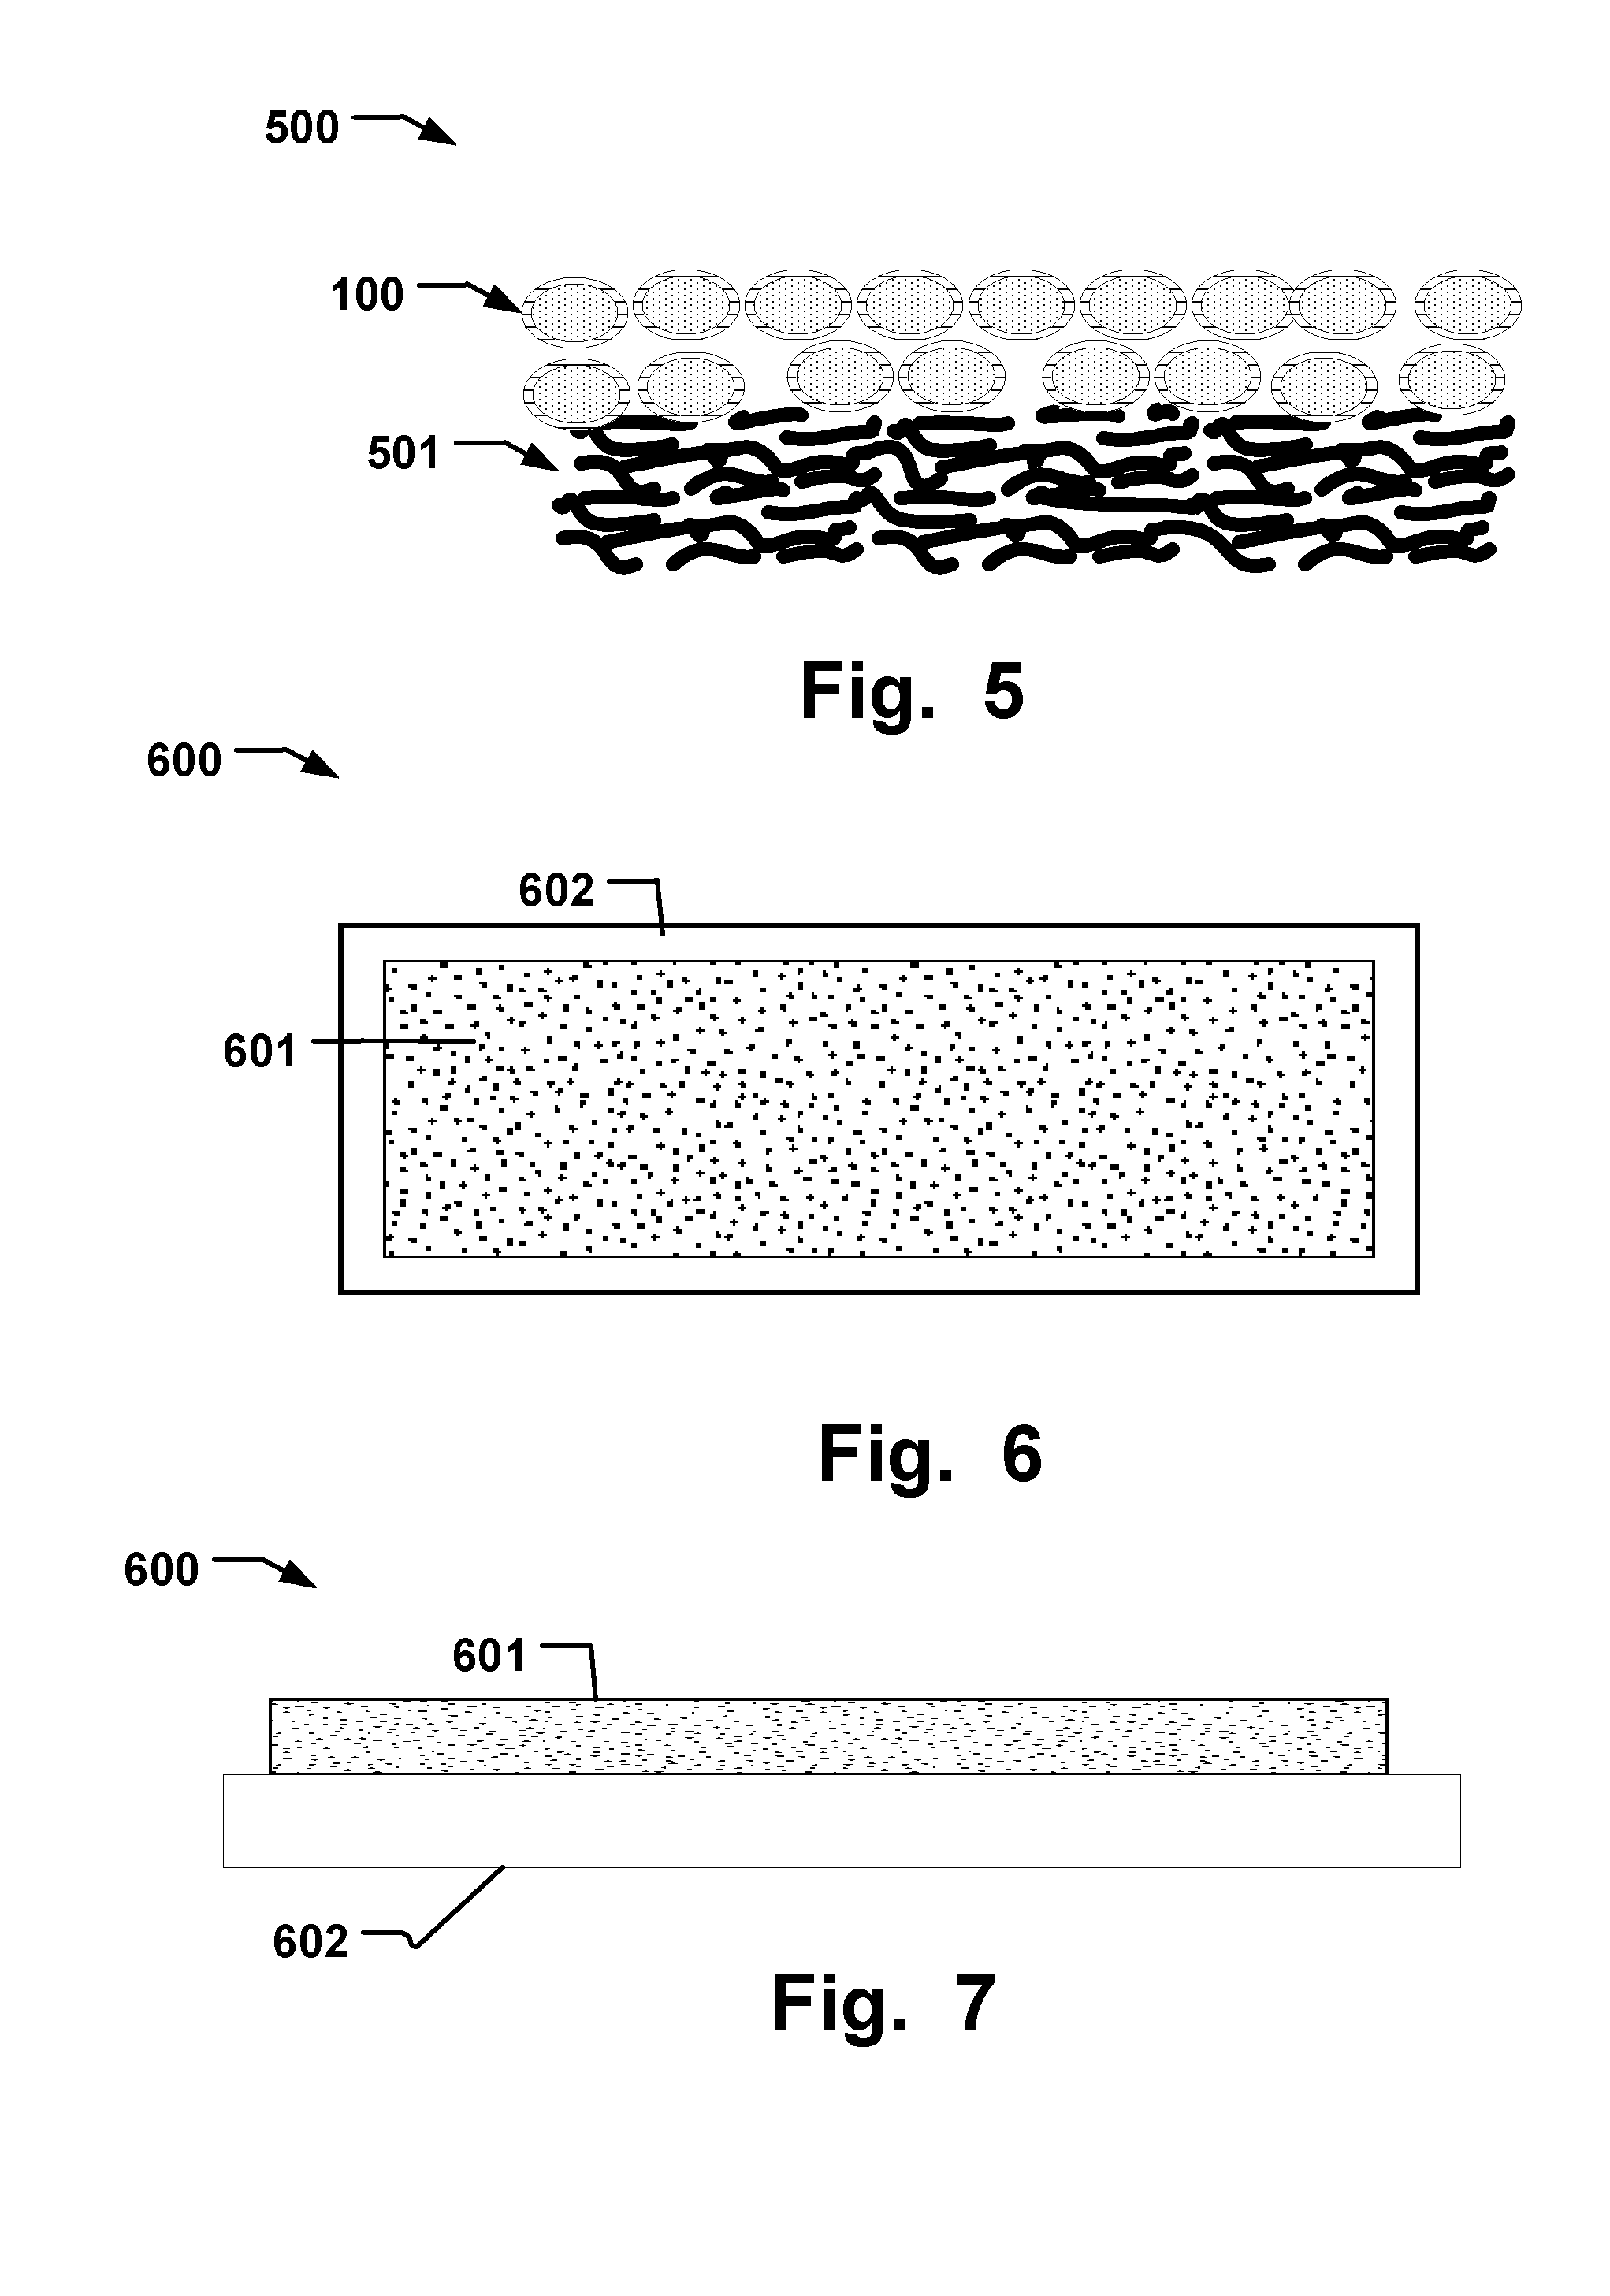 Device, System, And Method Comprising Microencapsulated Proton Donor For Release Of Nitric Oxide From A Polymer